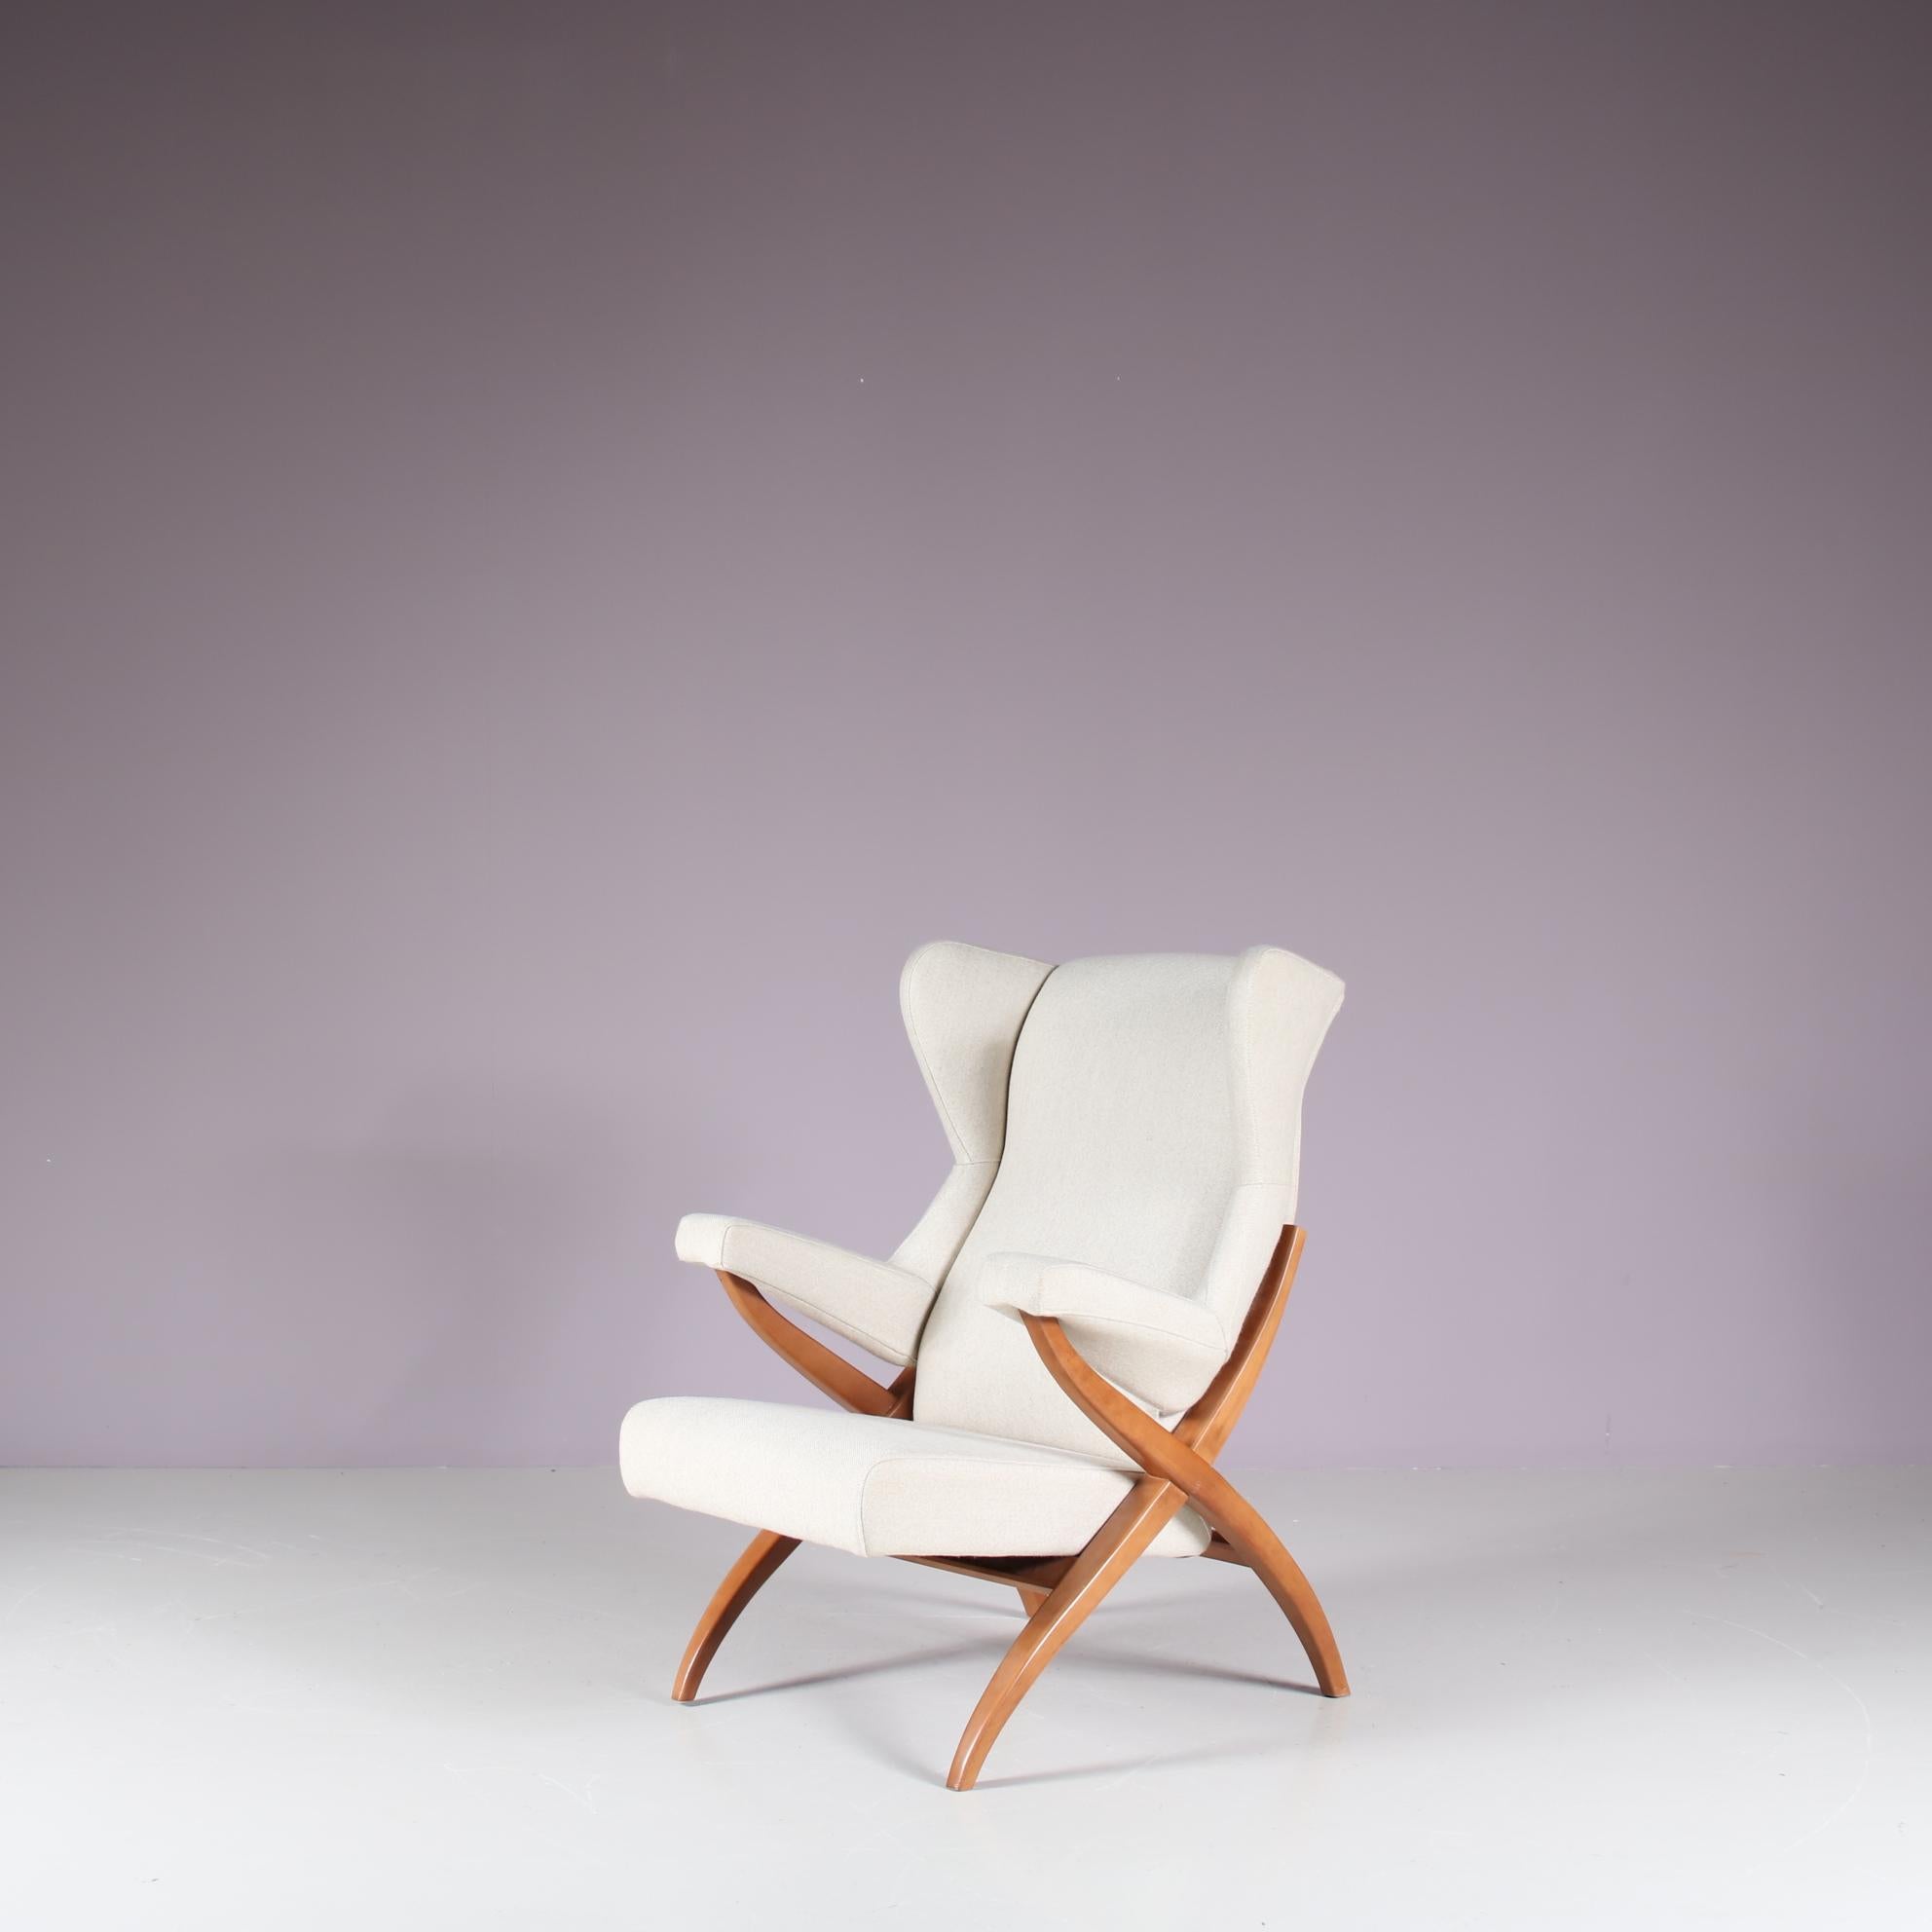 Fabric “Fiorenza” Chair by Franco Albini or Arflex, Italy 1970 For Sale